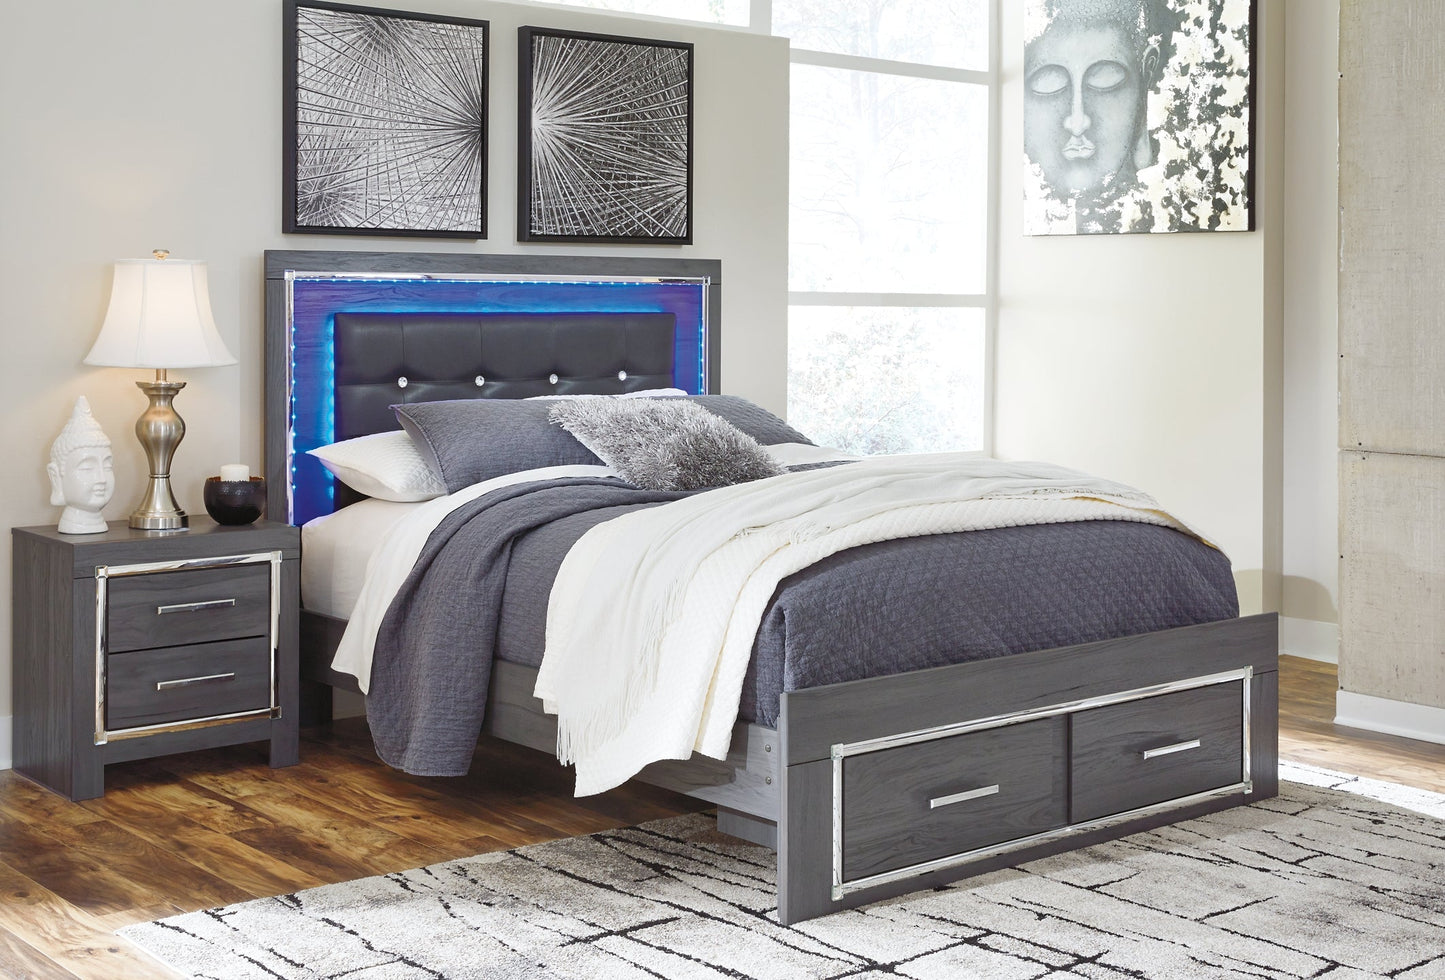 Lodanna Queen Panel Bed with 2 Storage Drawers at Walker Mattress and Furniture Locations in Cedar Park and Belton TX.